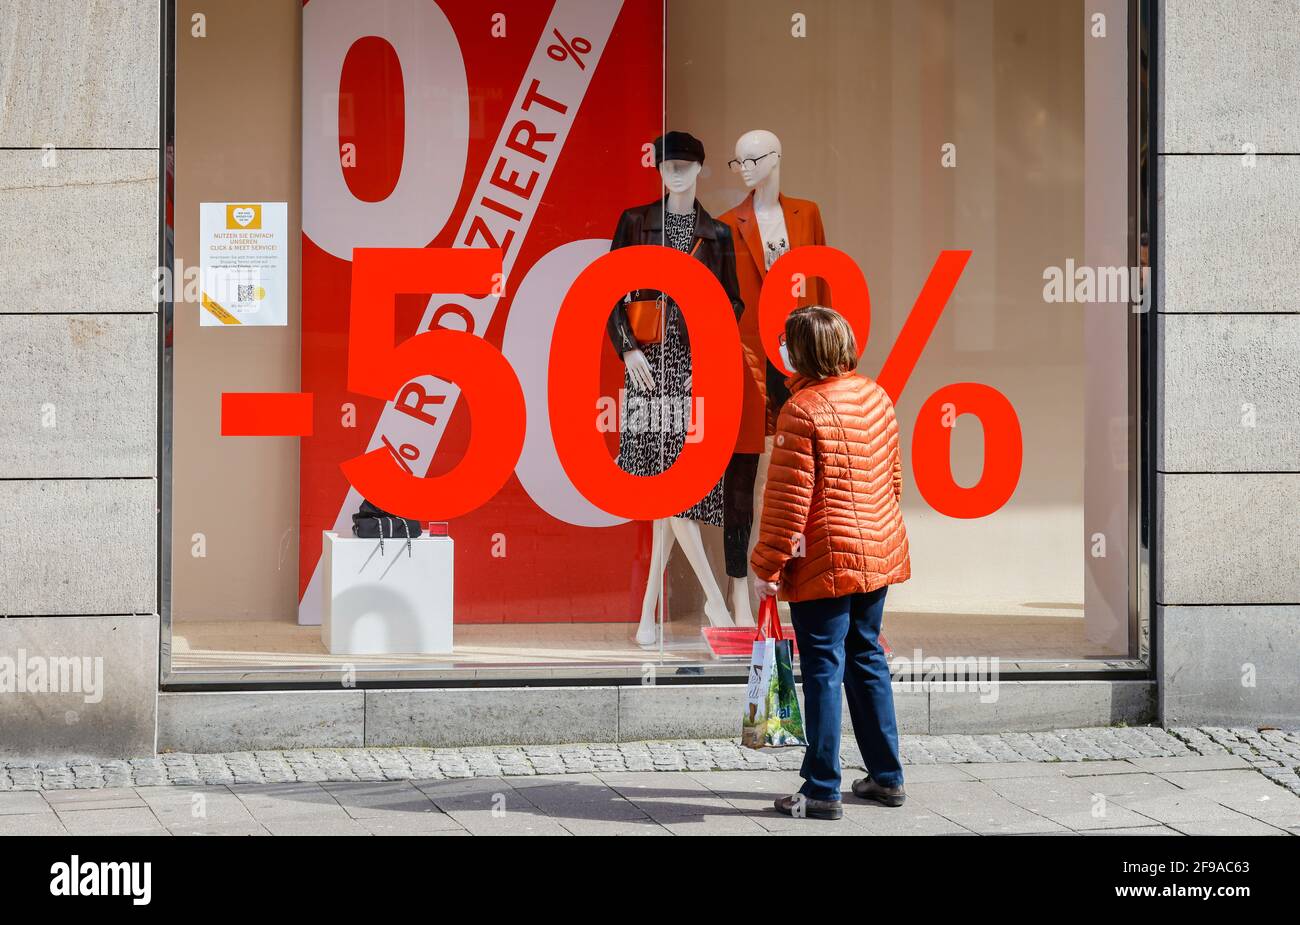 Essen, North Rhine-Westphalia, Germany - discount battle in the corona crisis, retail sales in times of the corona pandemic at the second lockdown, shops in NRW are partially open subject to conditions, Click & Meet, register online and make a shopping appointment, poster in the shop window Reduced, 50 percent discount. Stock Photo